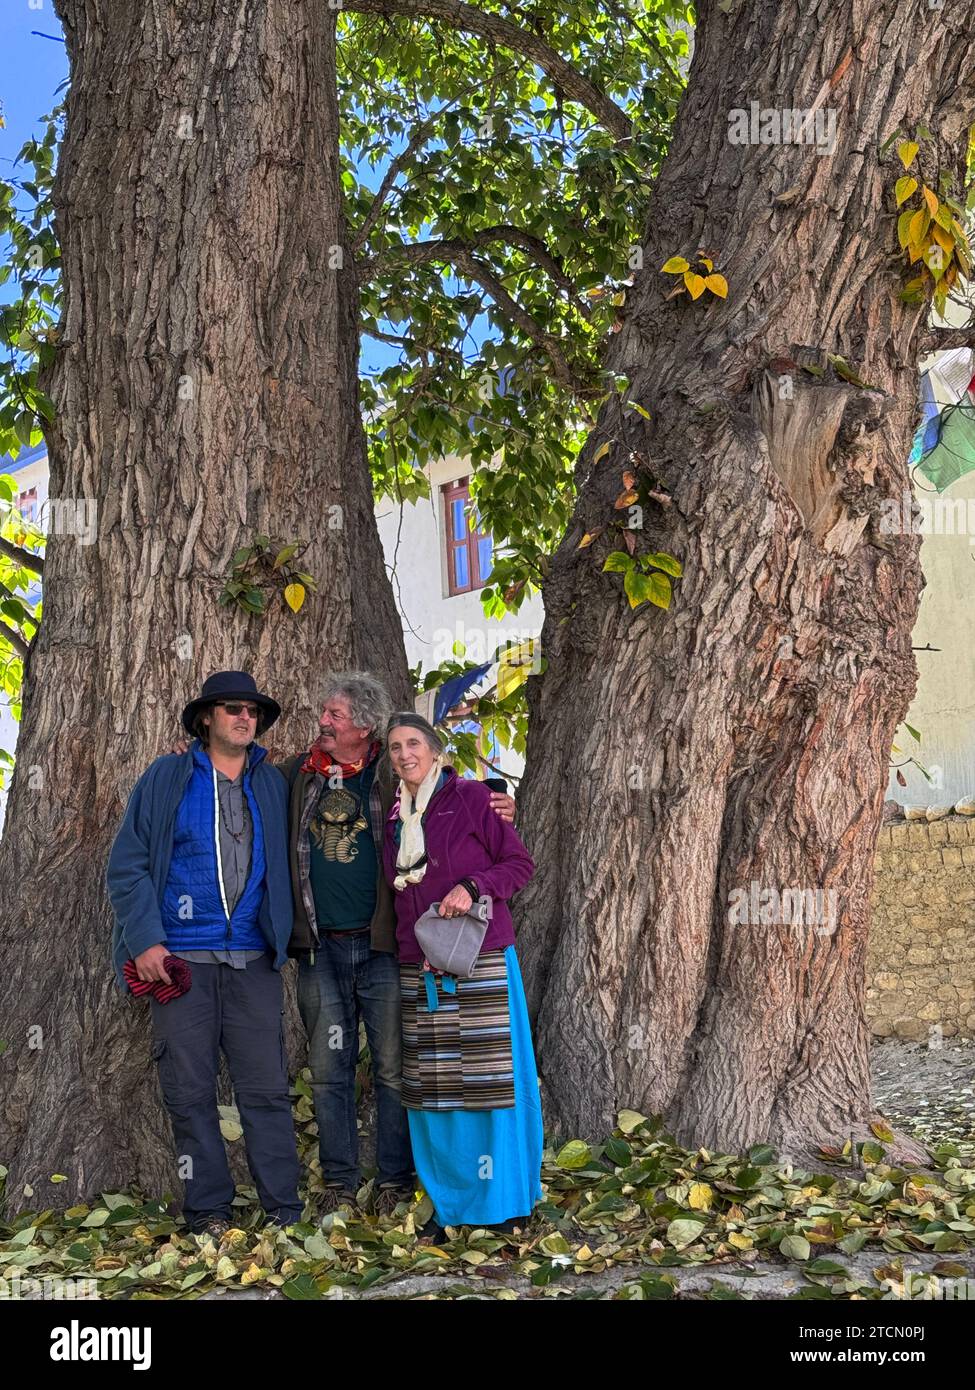 Christine Kolisch, Craig Lovell and Bodhi Garrett in Lo Manthang - Mustang District, Nepal Stock Photo